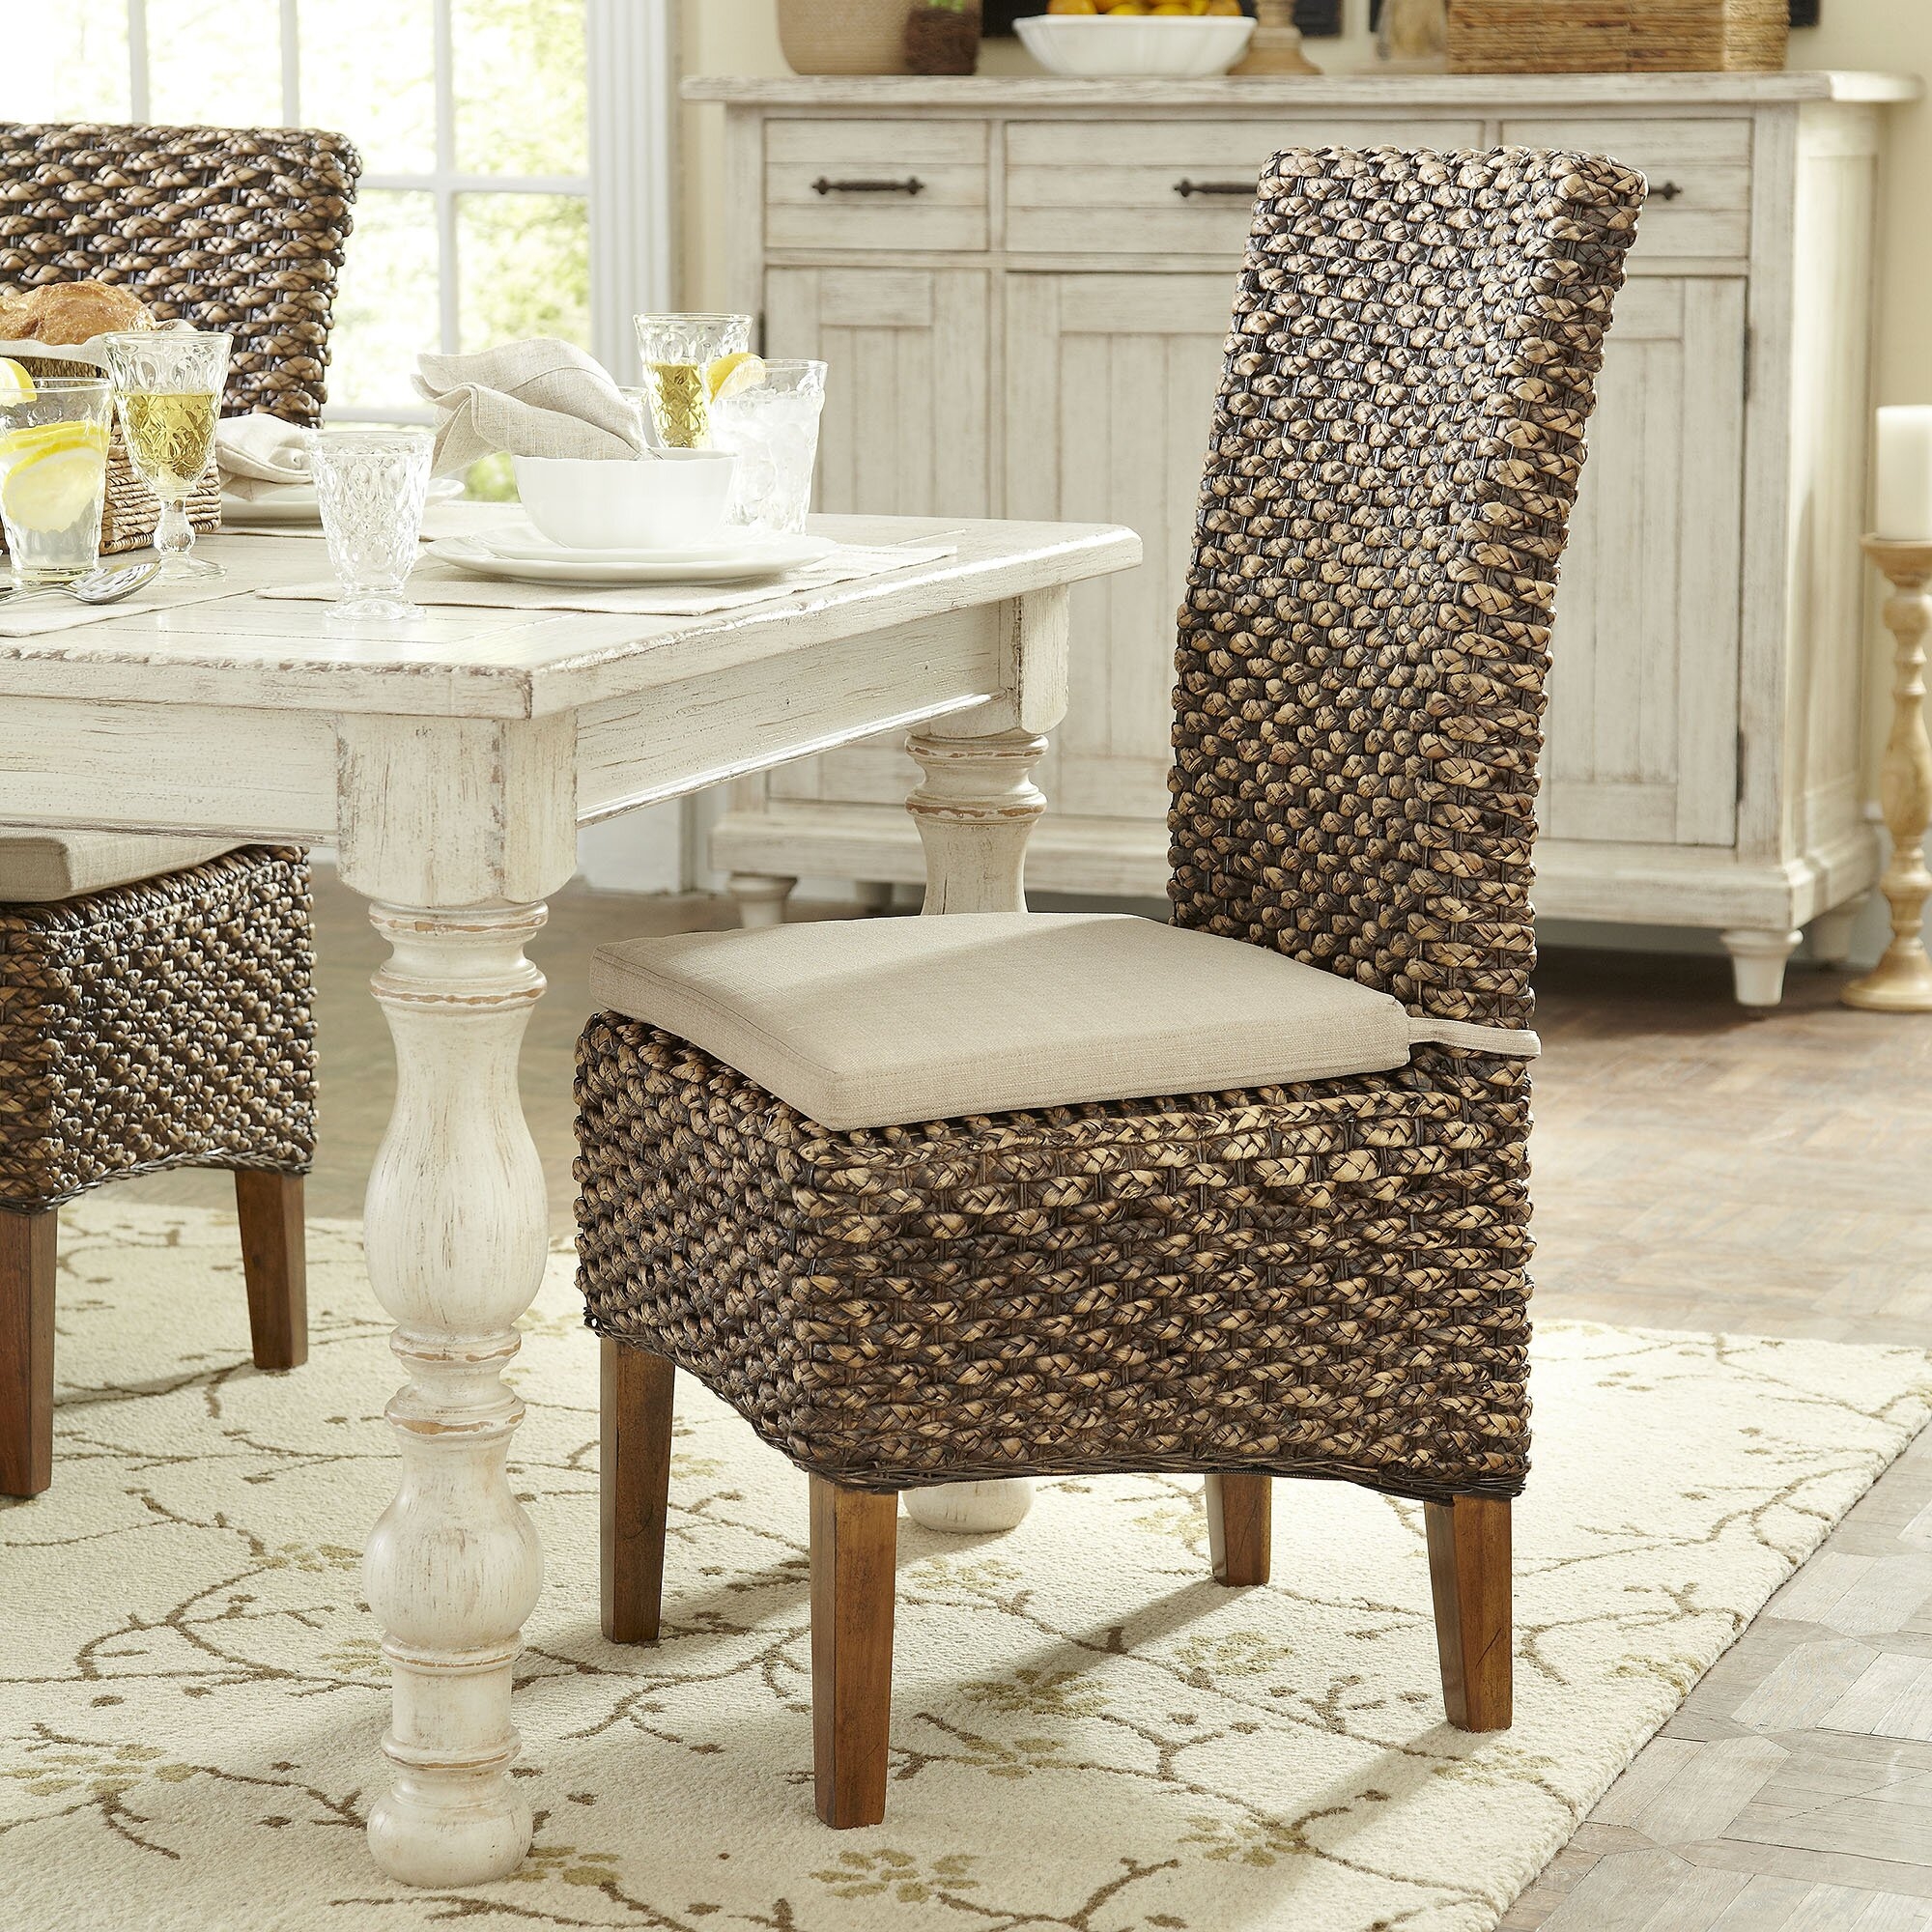 Seagrass dining chairs 10